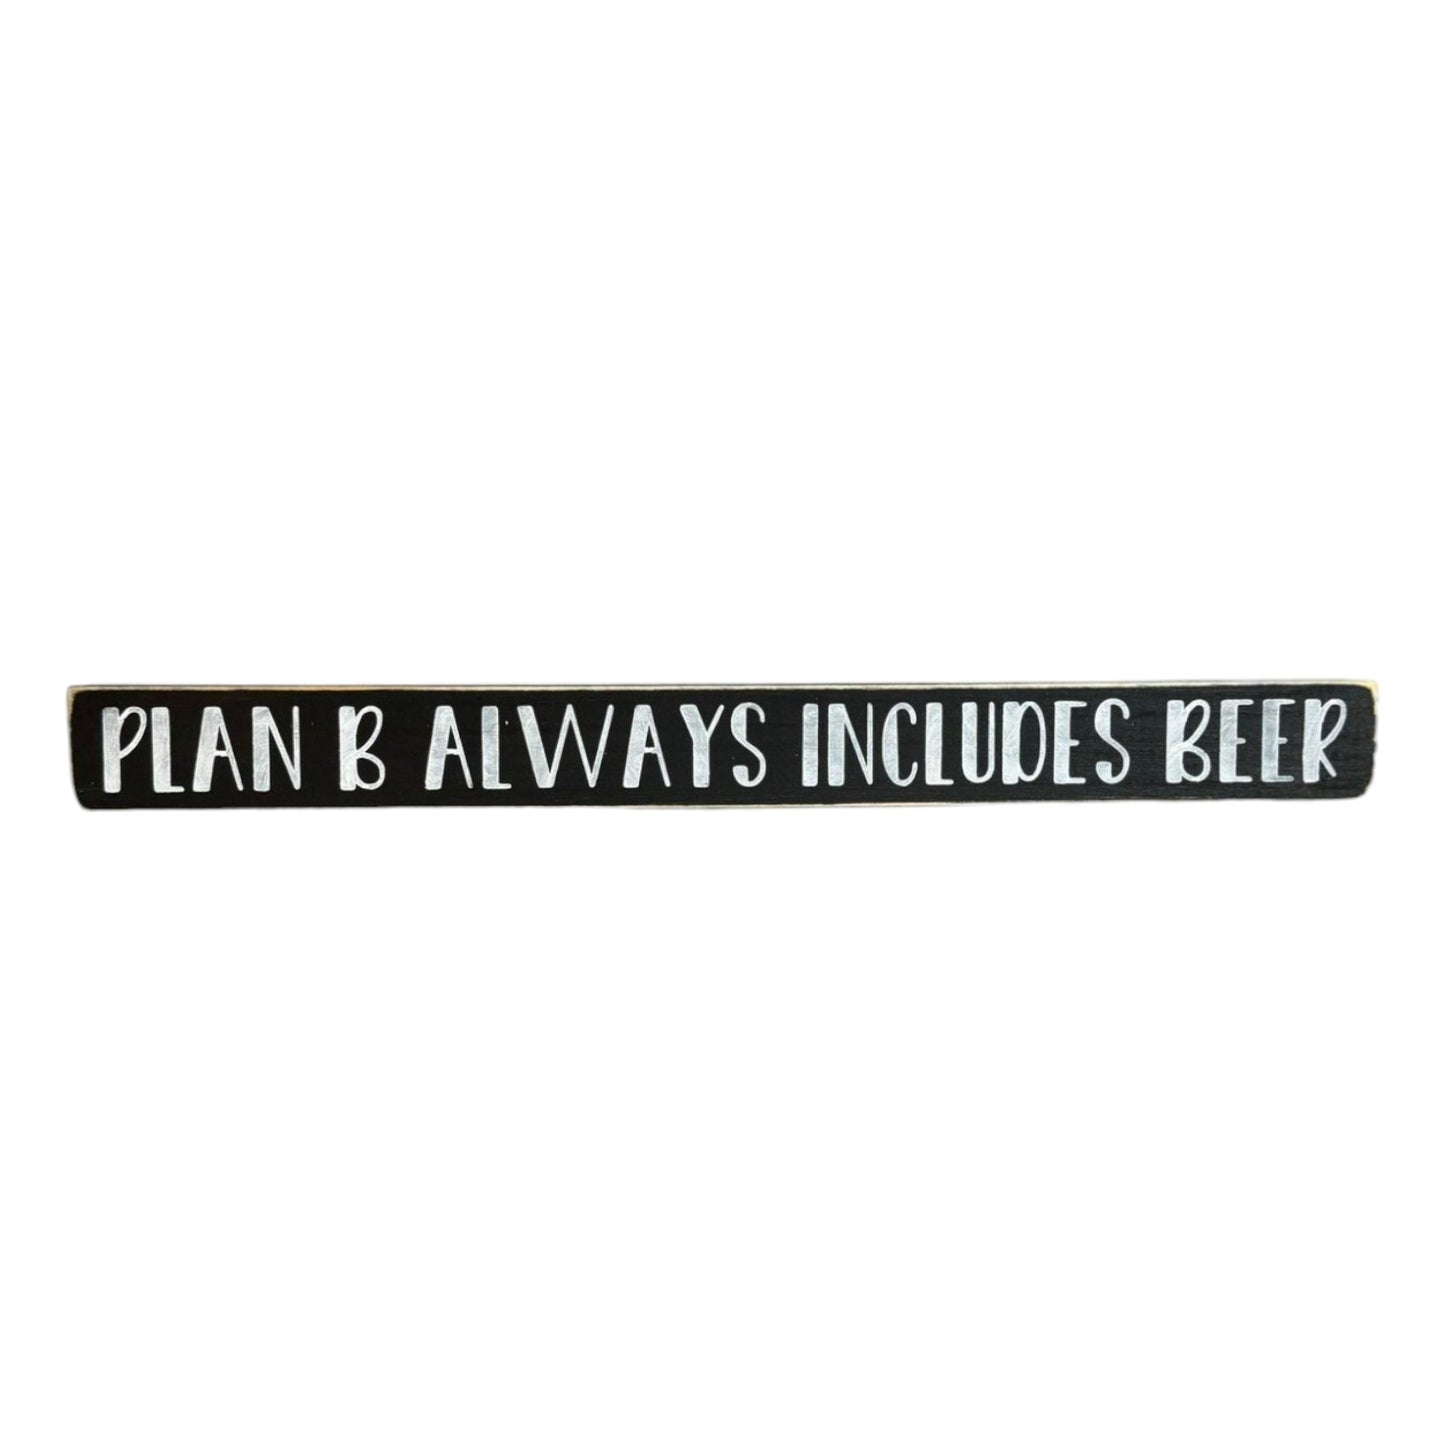 Handpainted black wood sign with white text reading 'Plan B Always Includes Beer,' freestanding 16-inch decor for shelves, desks, and tabletops.